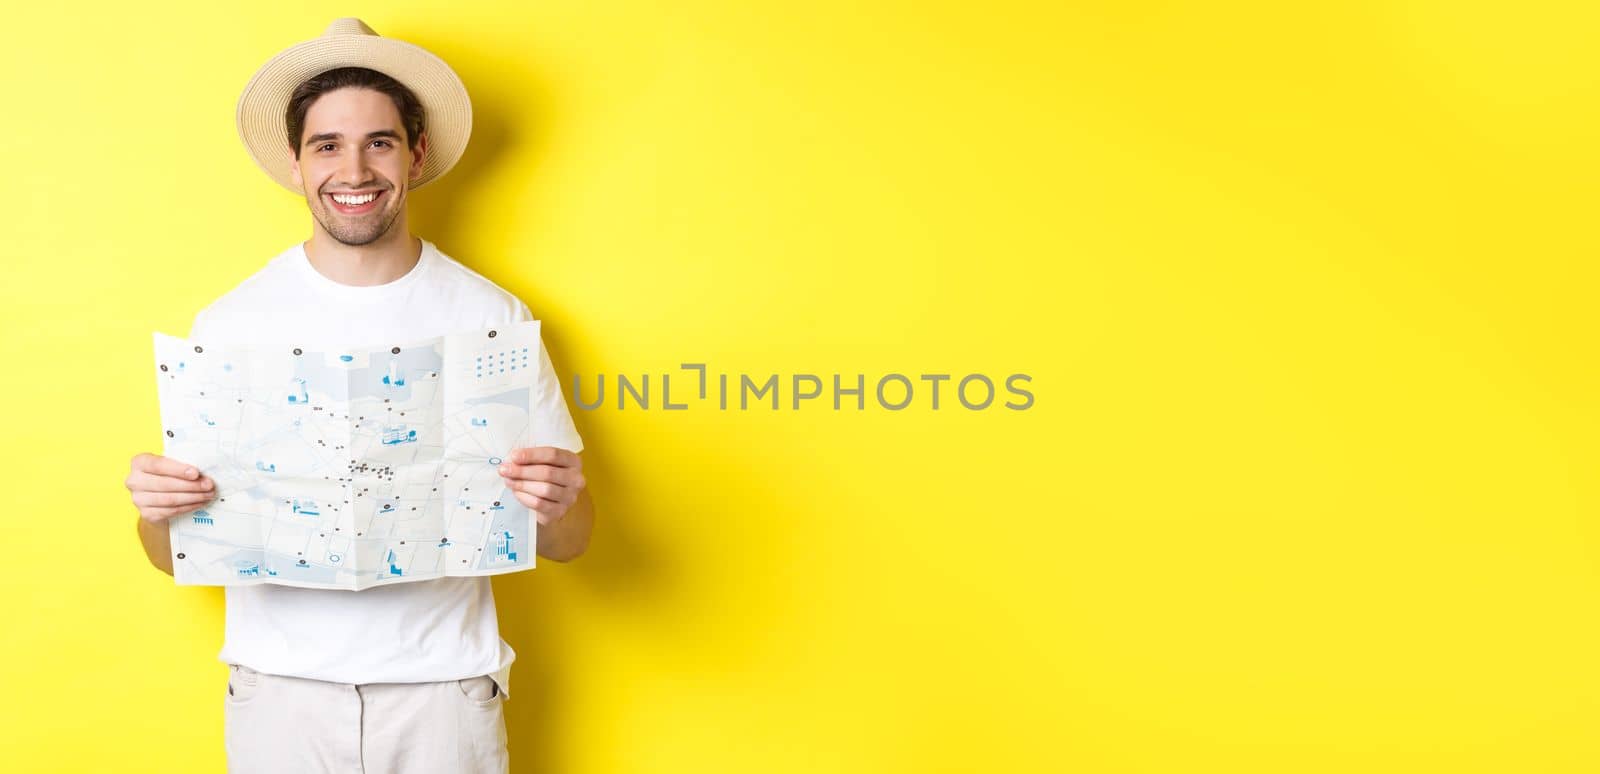 Travelling, vacation and tourism concept. Smiling young man going on trip, holding road map and smiling, standing over yellow background.